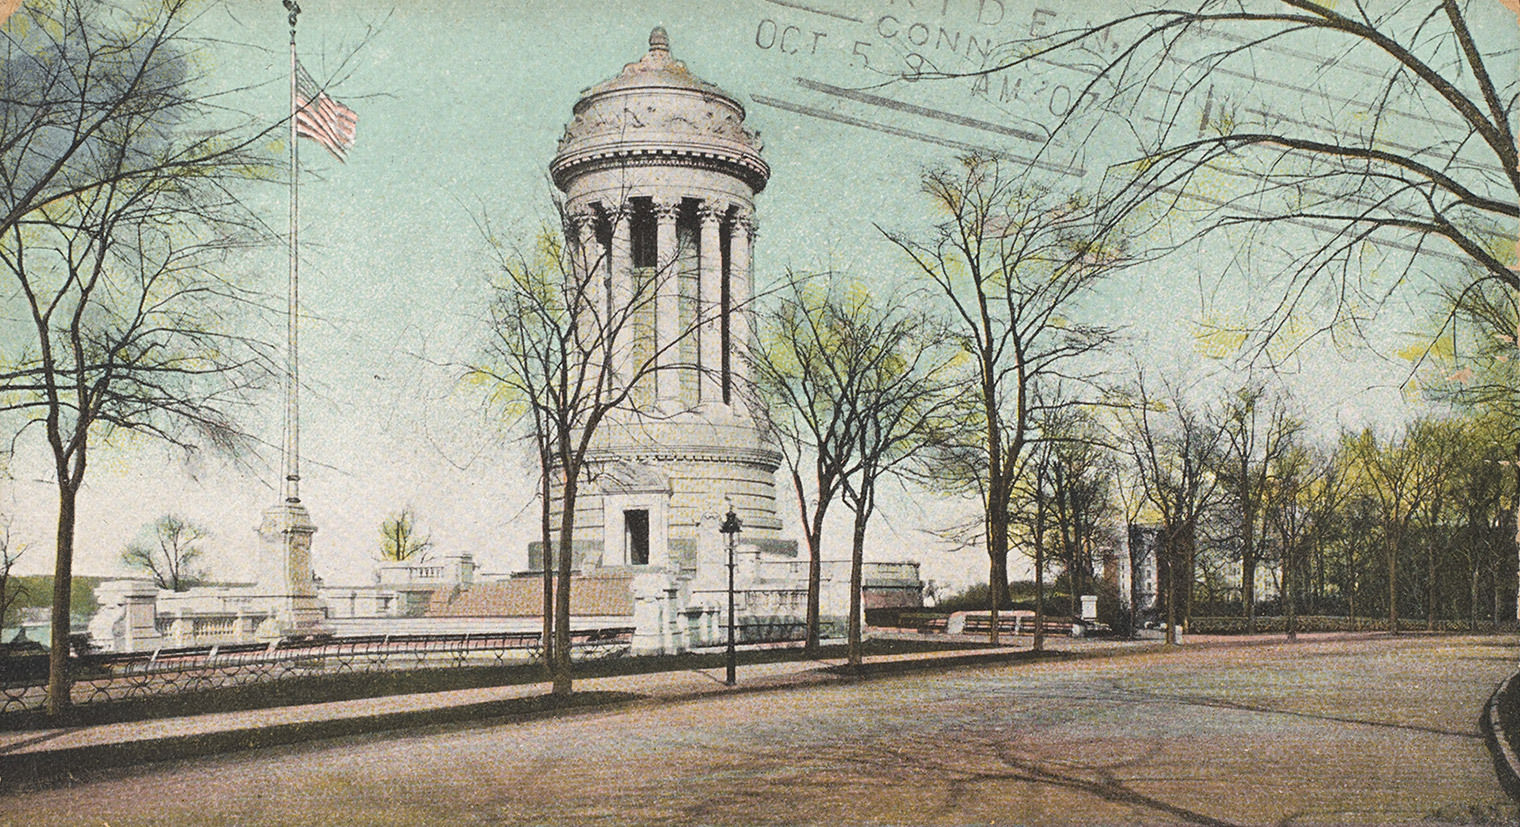 A postcard depicting the Soldier's and Sailor's Monument in NYC